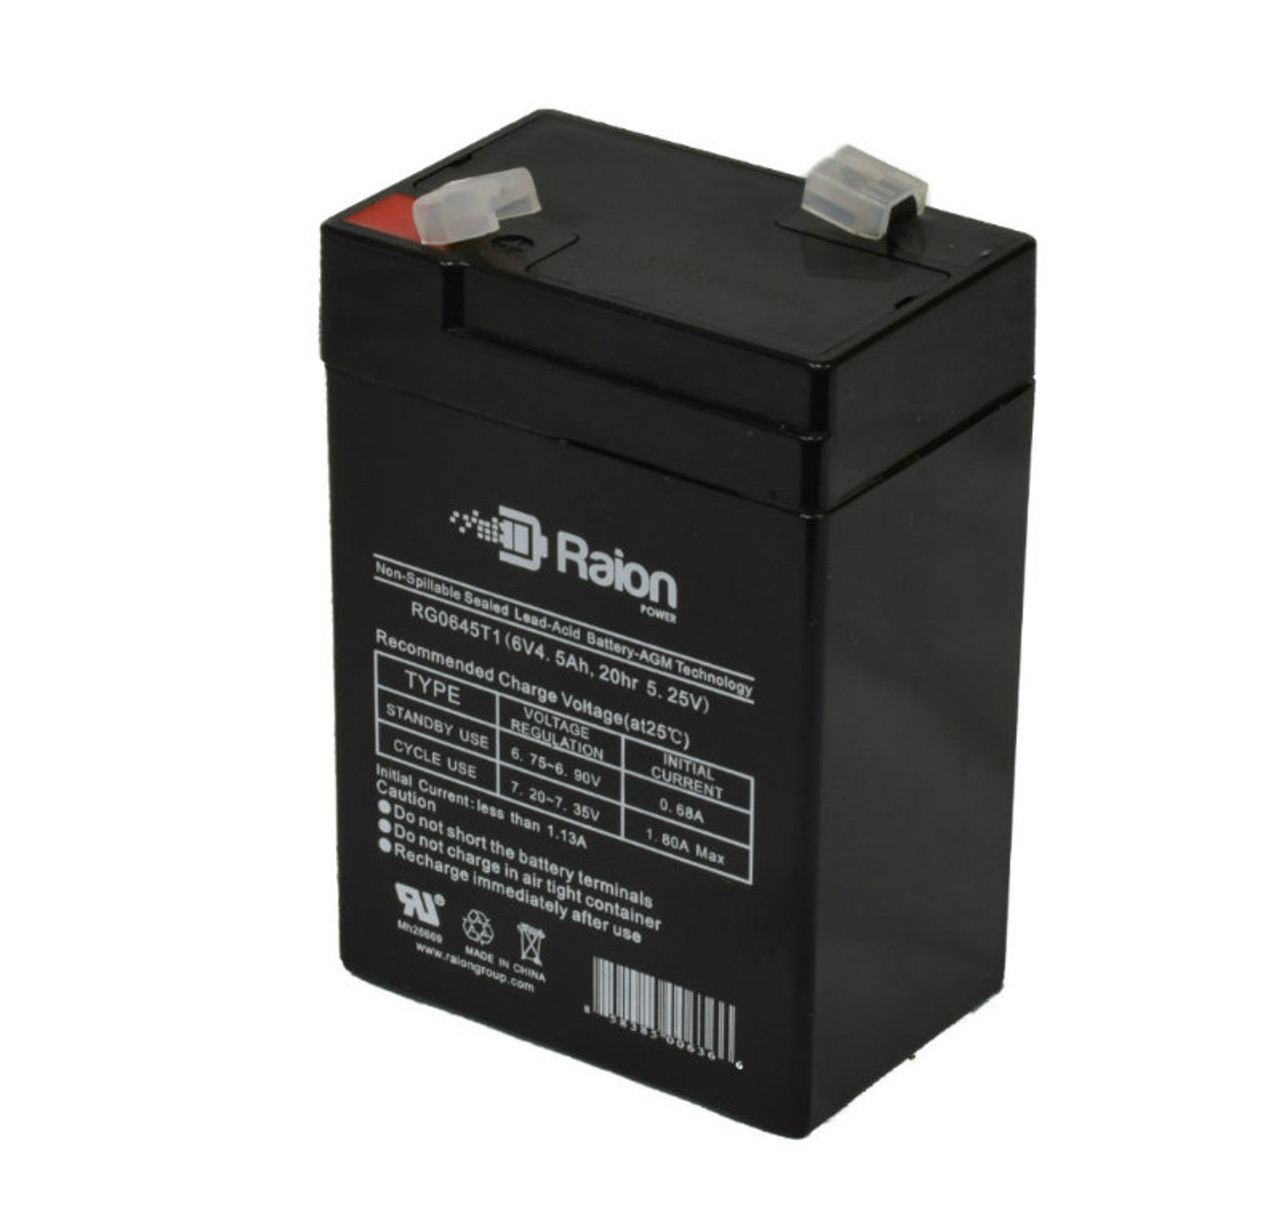 Raion Power RG0645T1 6V 4.5Ah Replacement Battery Cartridge for National Power Corporation GS012P1